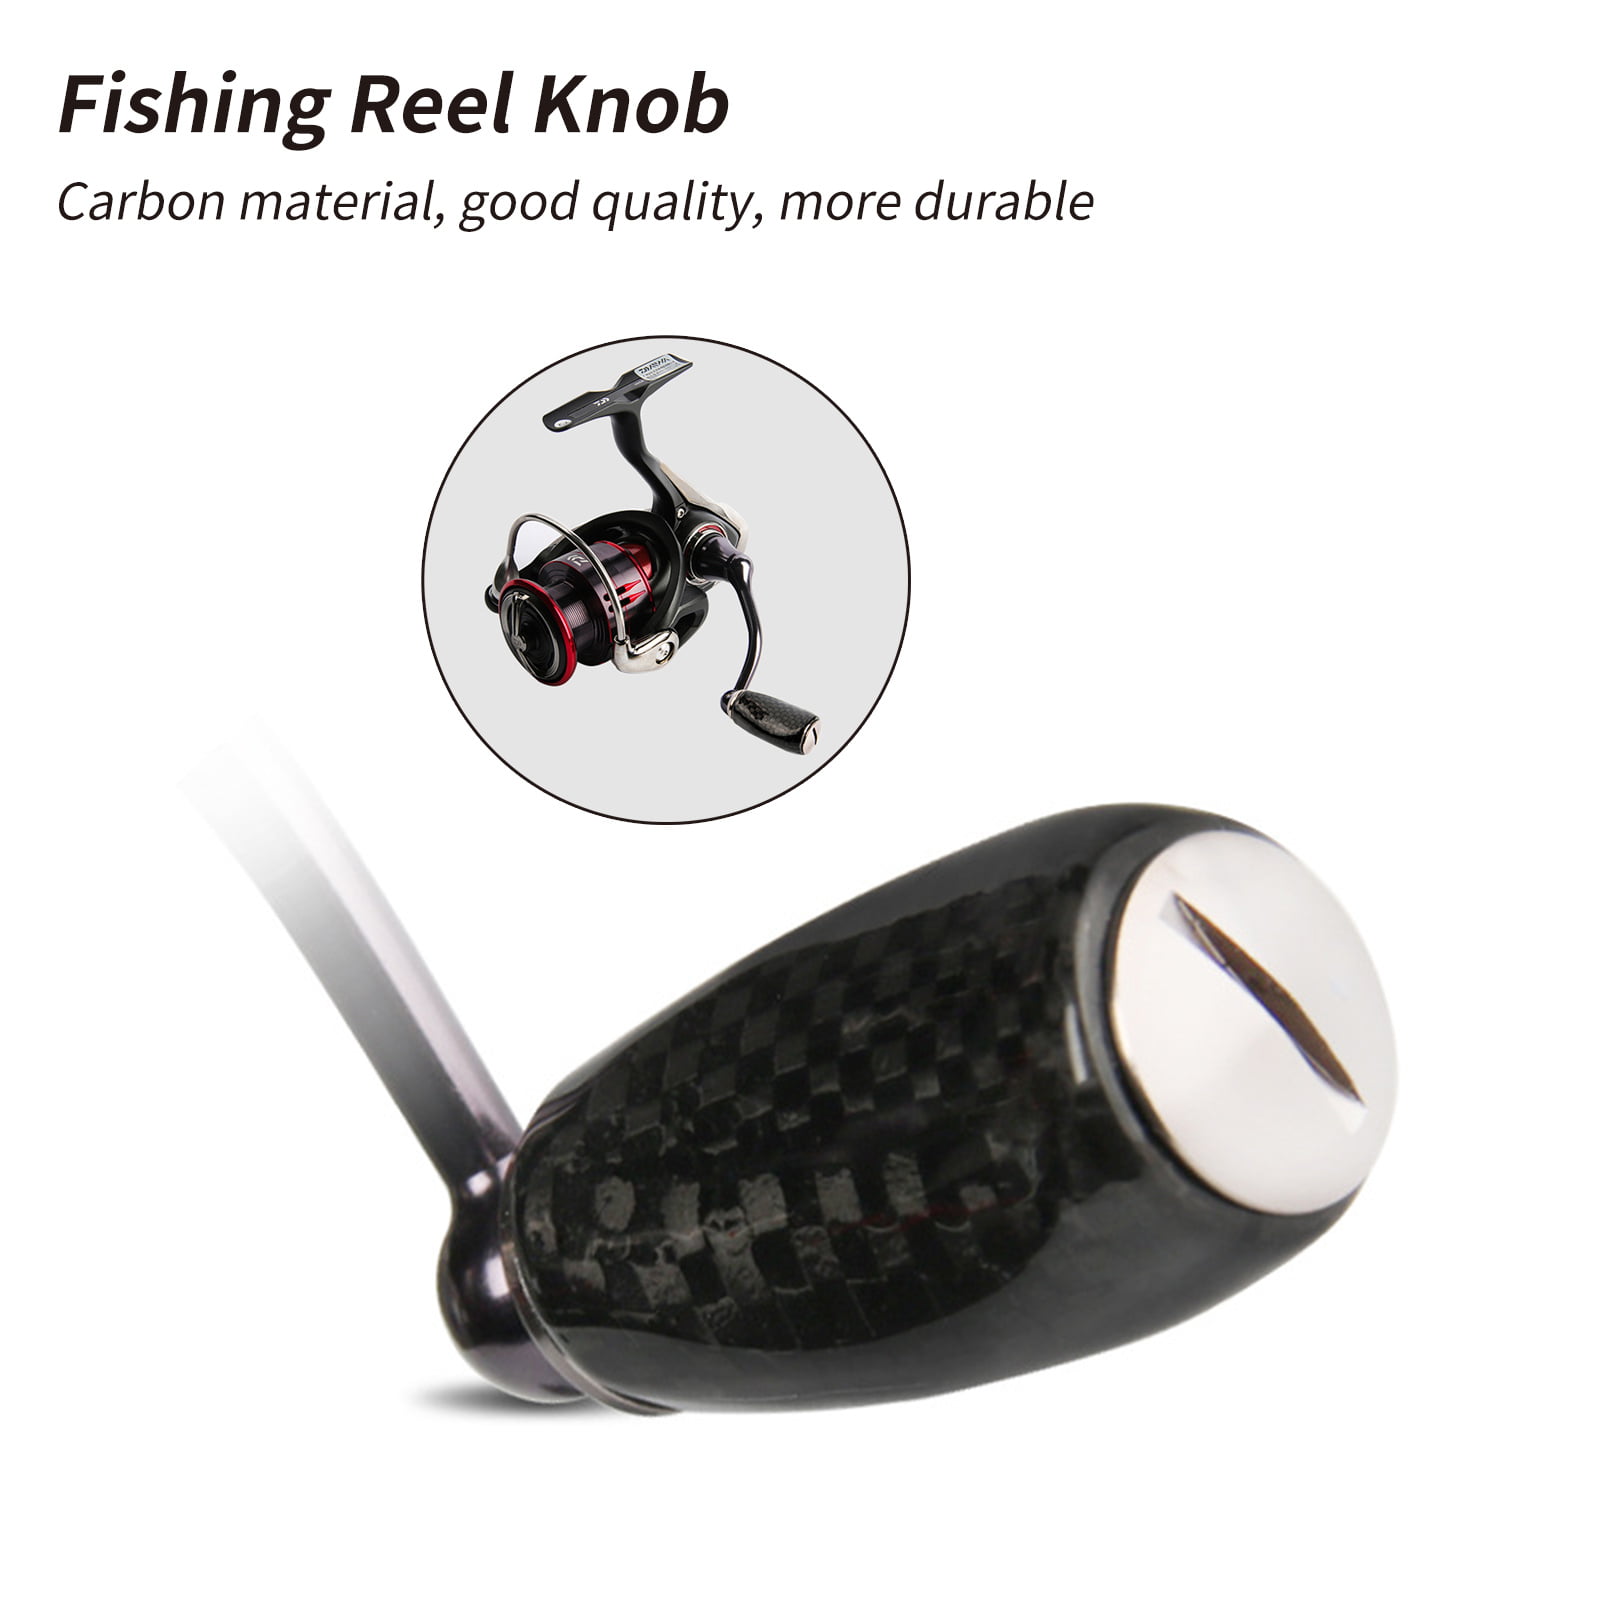 Fishing Reel Carbon Handle Lightweight Durable and Sturdy Anti-Corrosion Spinning Reels for Reel Dual Handle Fishing Reel Handle Knob